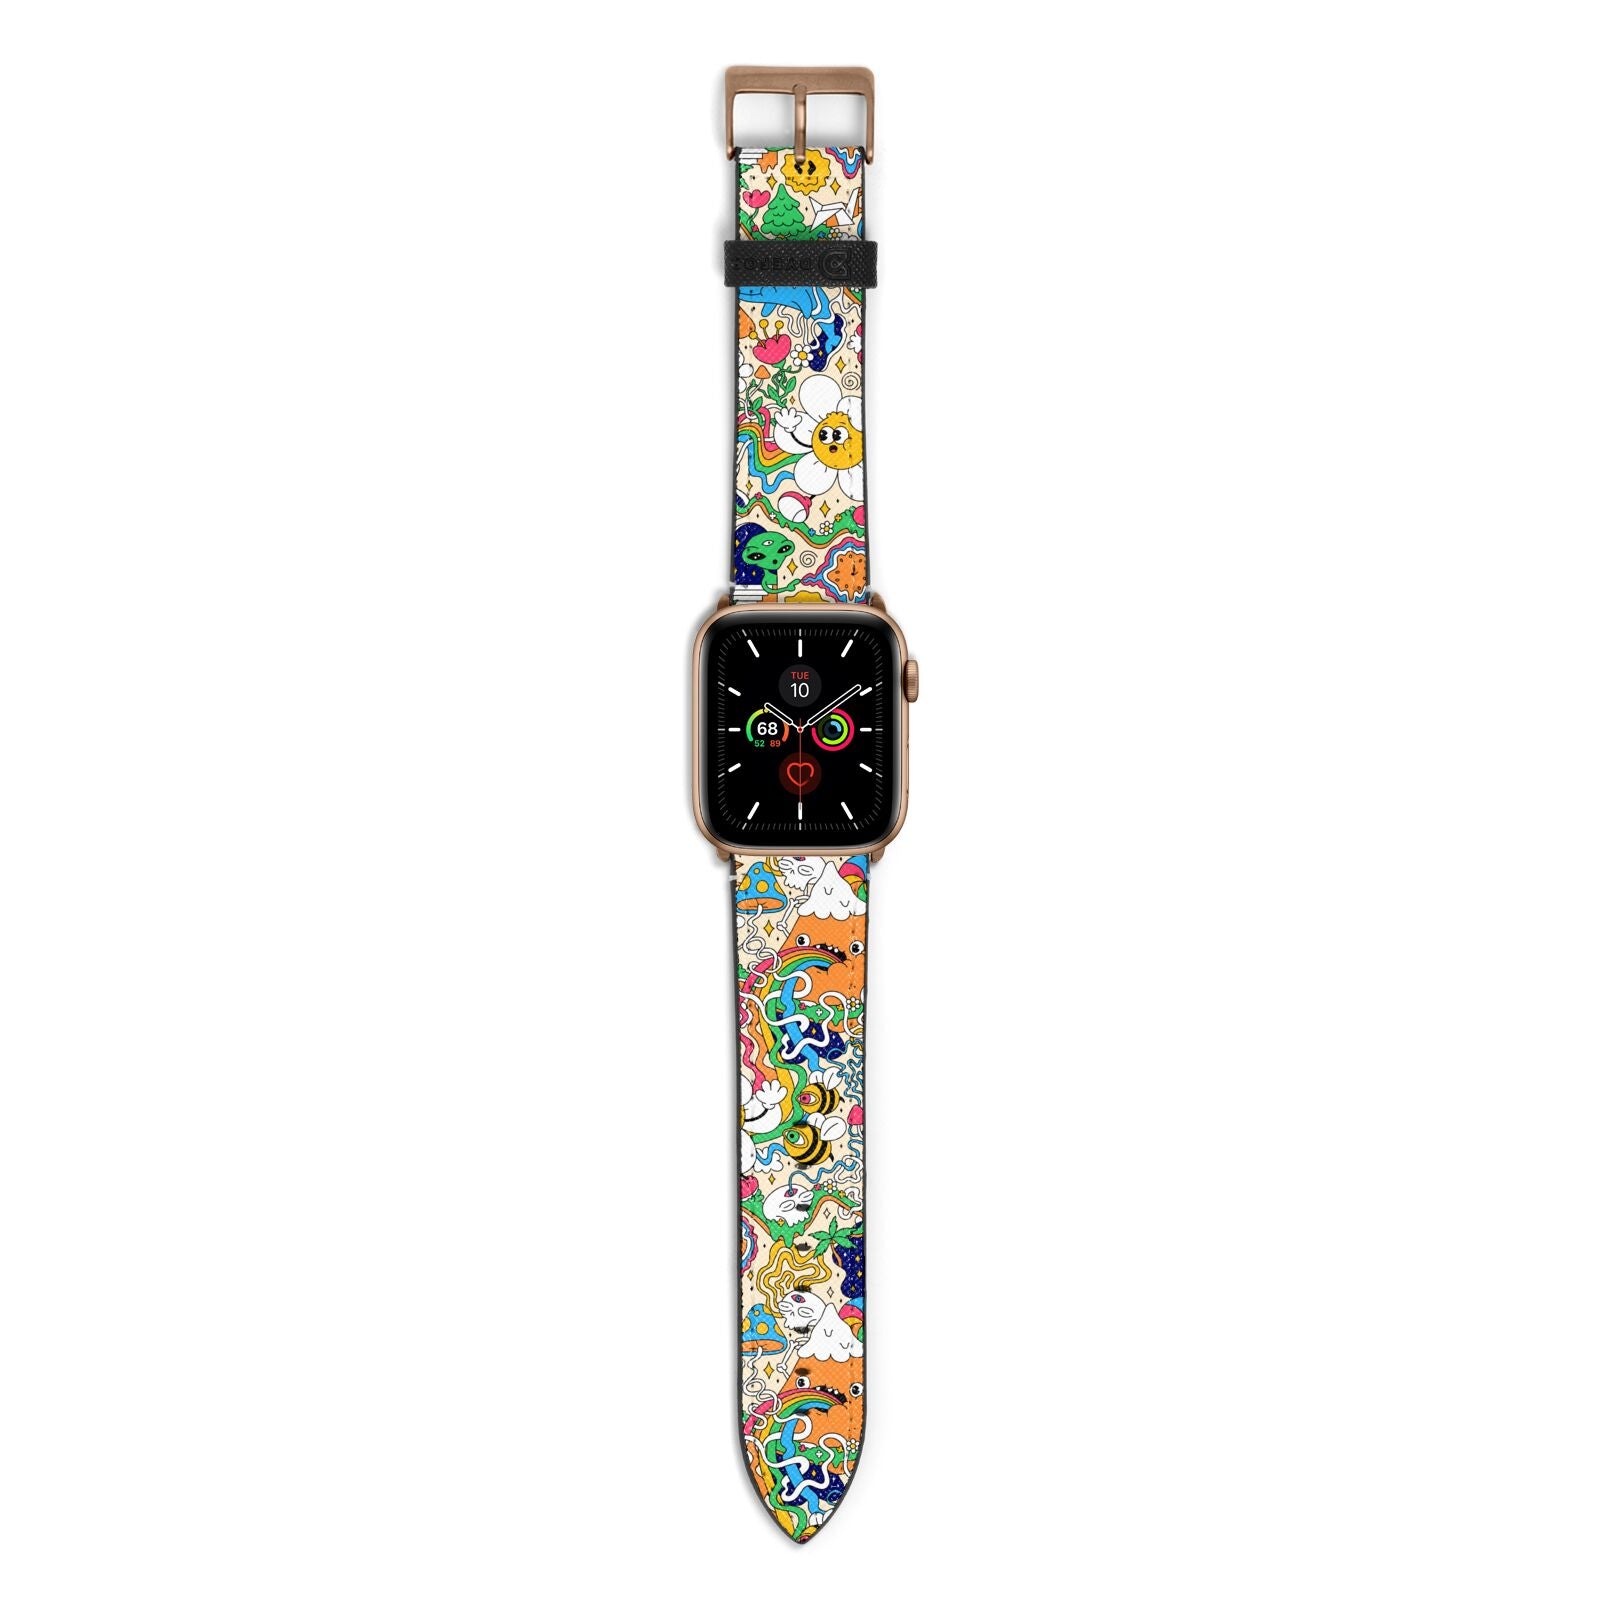 Psychedelic Trippy Apple Watch Strap with Gold Hardware